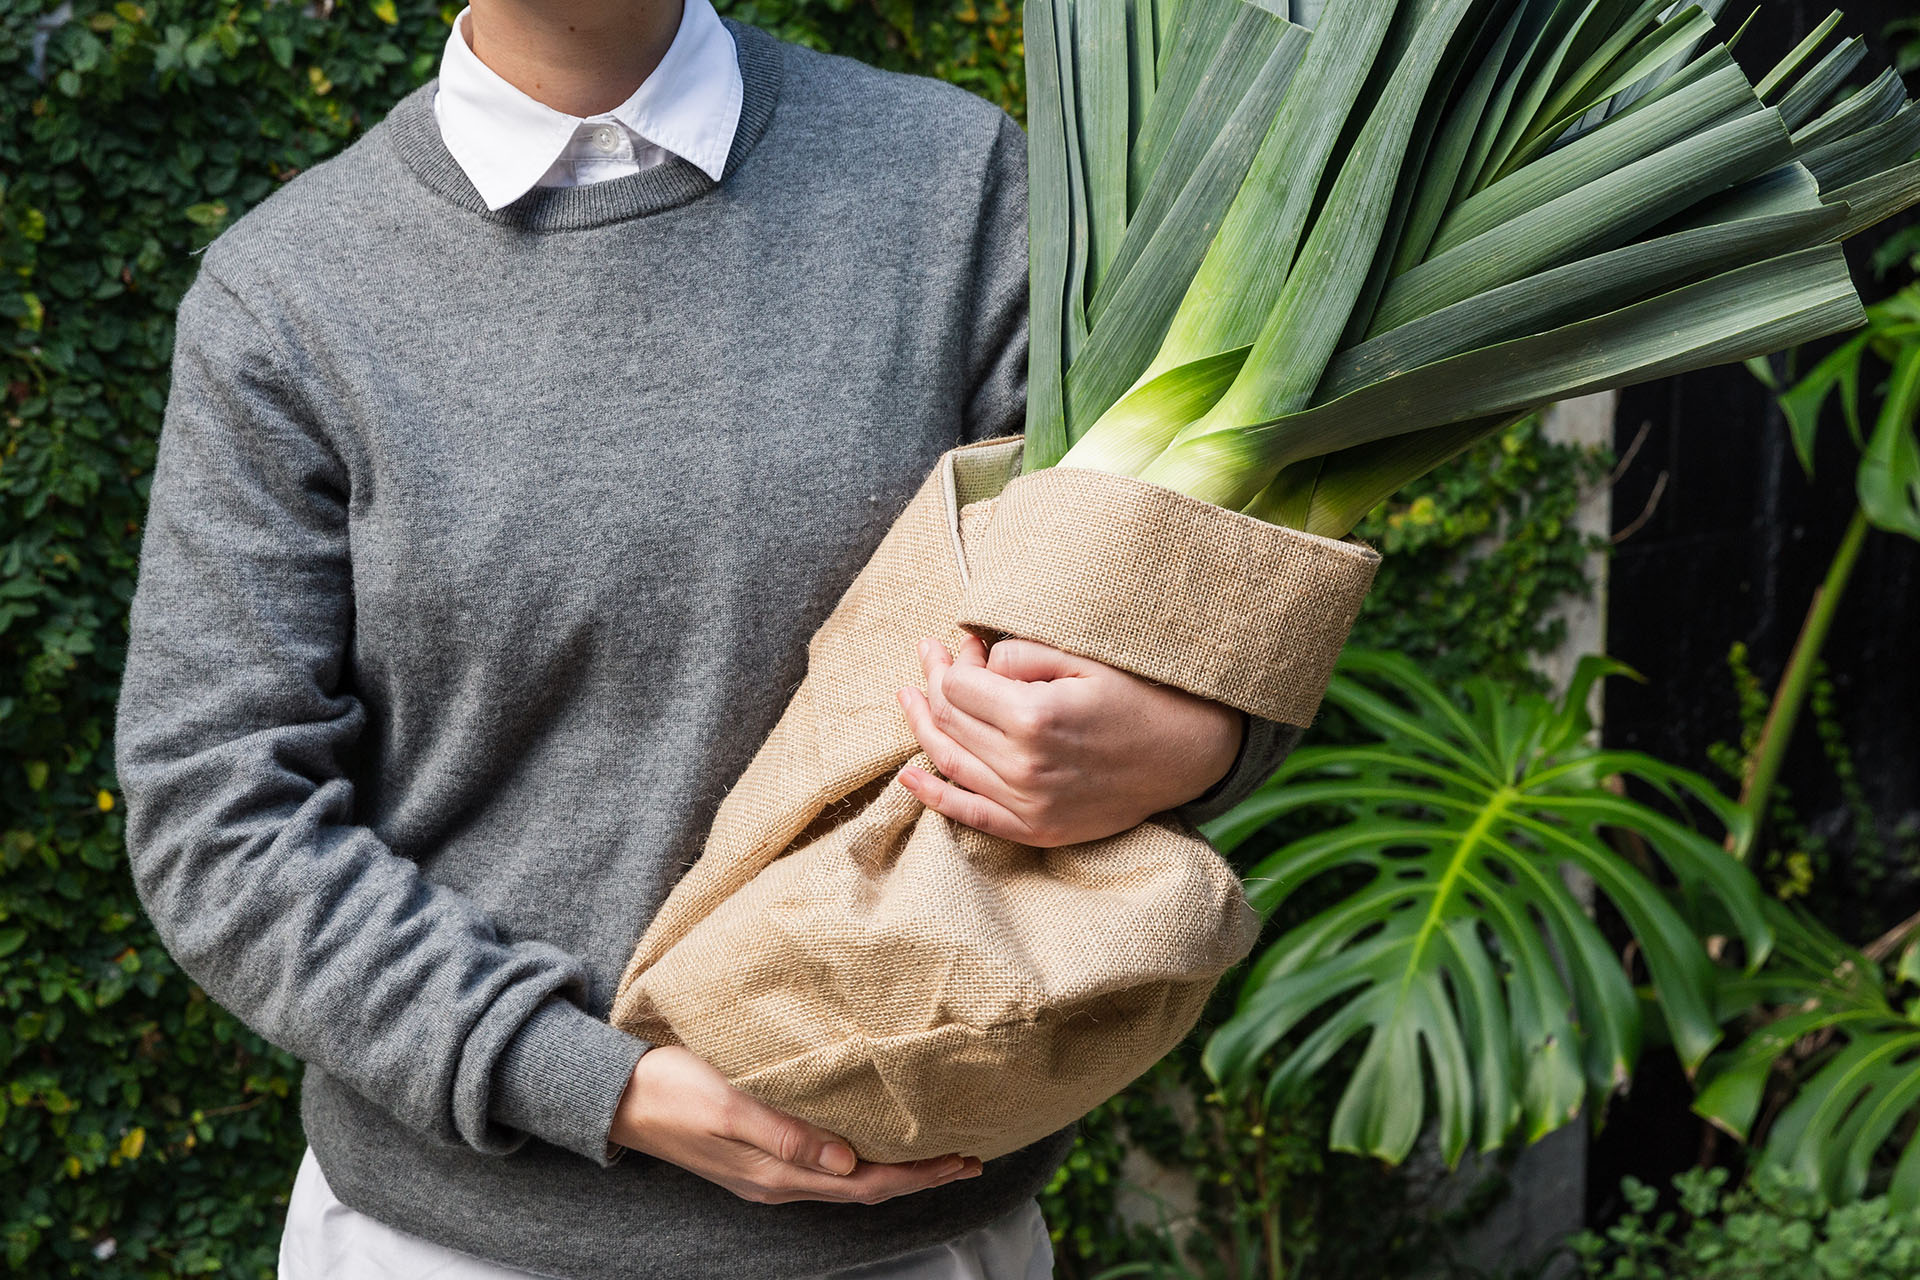 person holding a large leek in a brown sack bag